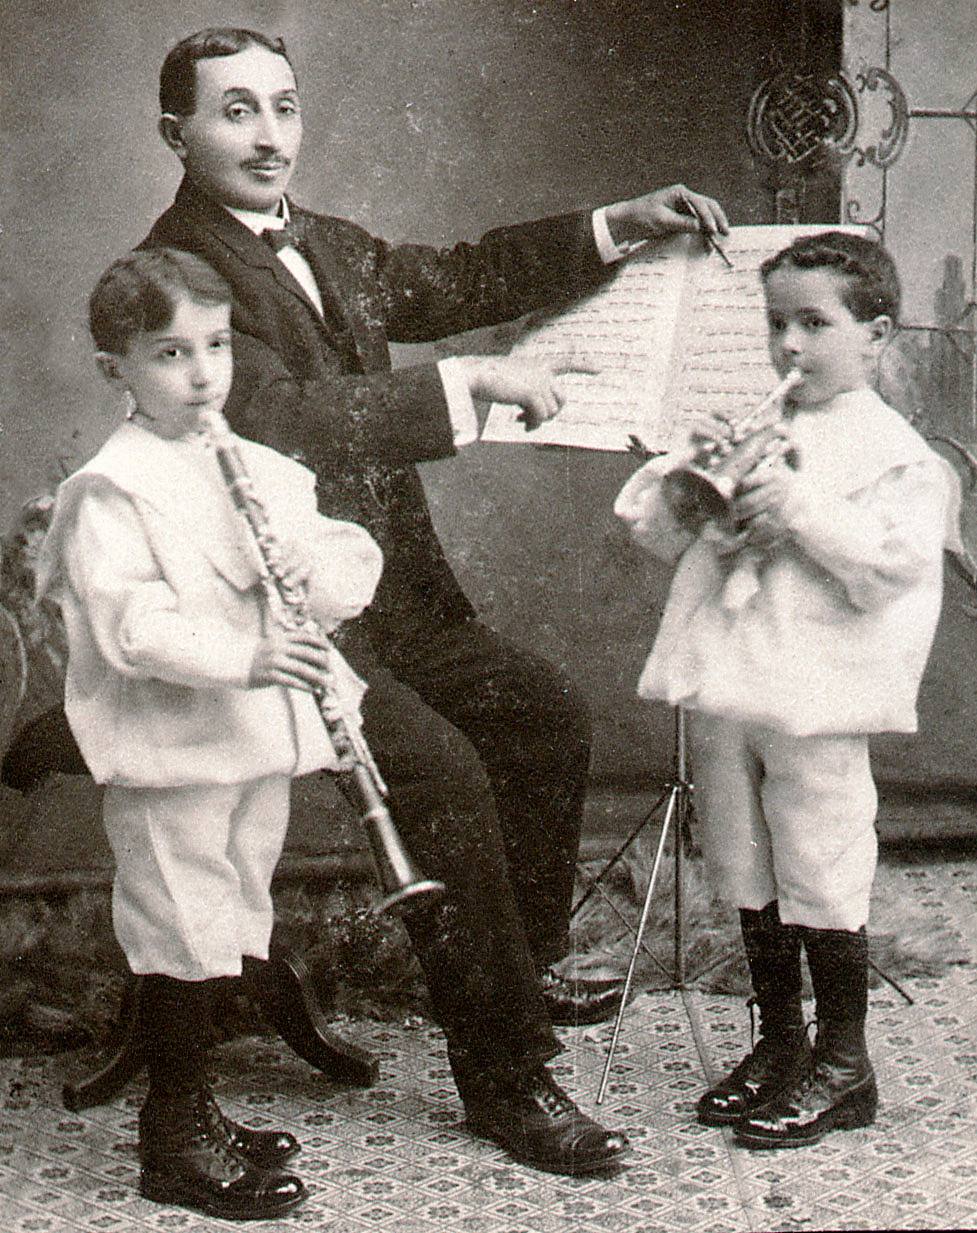 This picture shows three members of the Shilkret family - Jack, his father Wulf (William) and brother Harry - probably around 1902. Jack, my grandfather, was born in 1896, and he appears to be about six in this photo, hence the date. He was an orchestra leader in the 20's through the 40's, and had several radio shows during the 30's. He composed popular songs and, among other things, did the background music for a number of the Fitzpatrick Travel Talks ("as the sun sinks slowly in the west..."). In addition to his work under his own name, Jack and Uncle Harry both recorded many records with their older brother Nat's RCA Victor orchestra, with Jack on piano and Harry on trumpet. View full size.